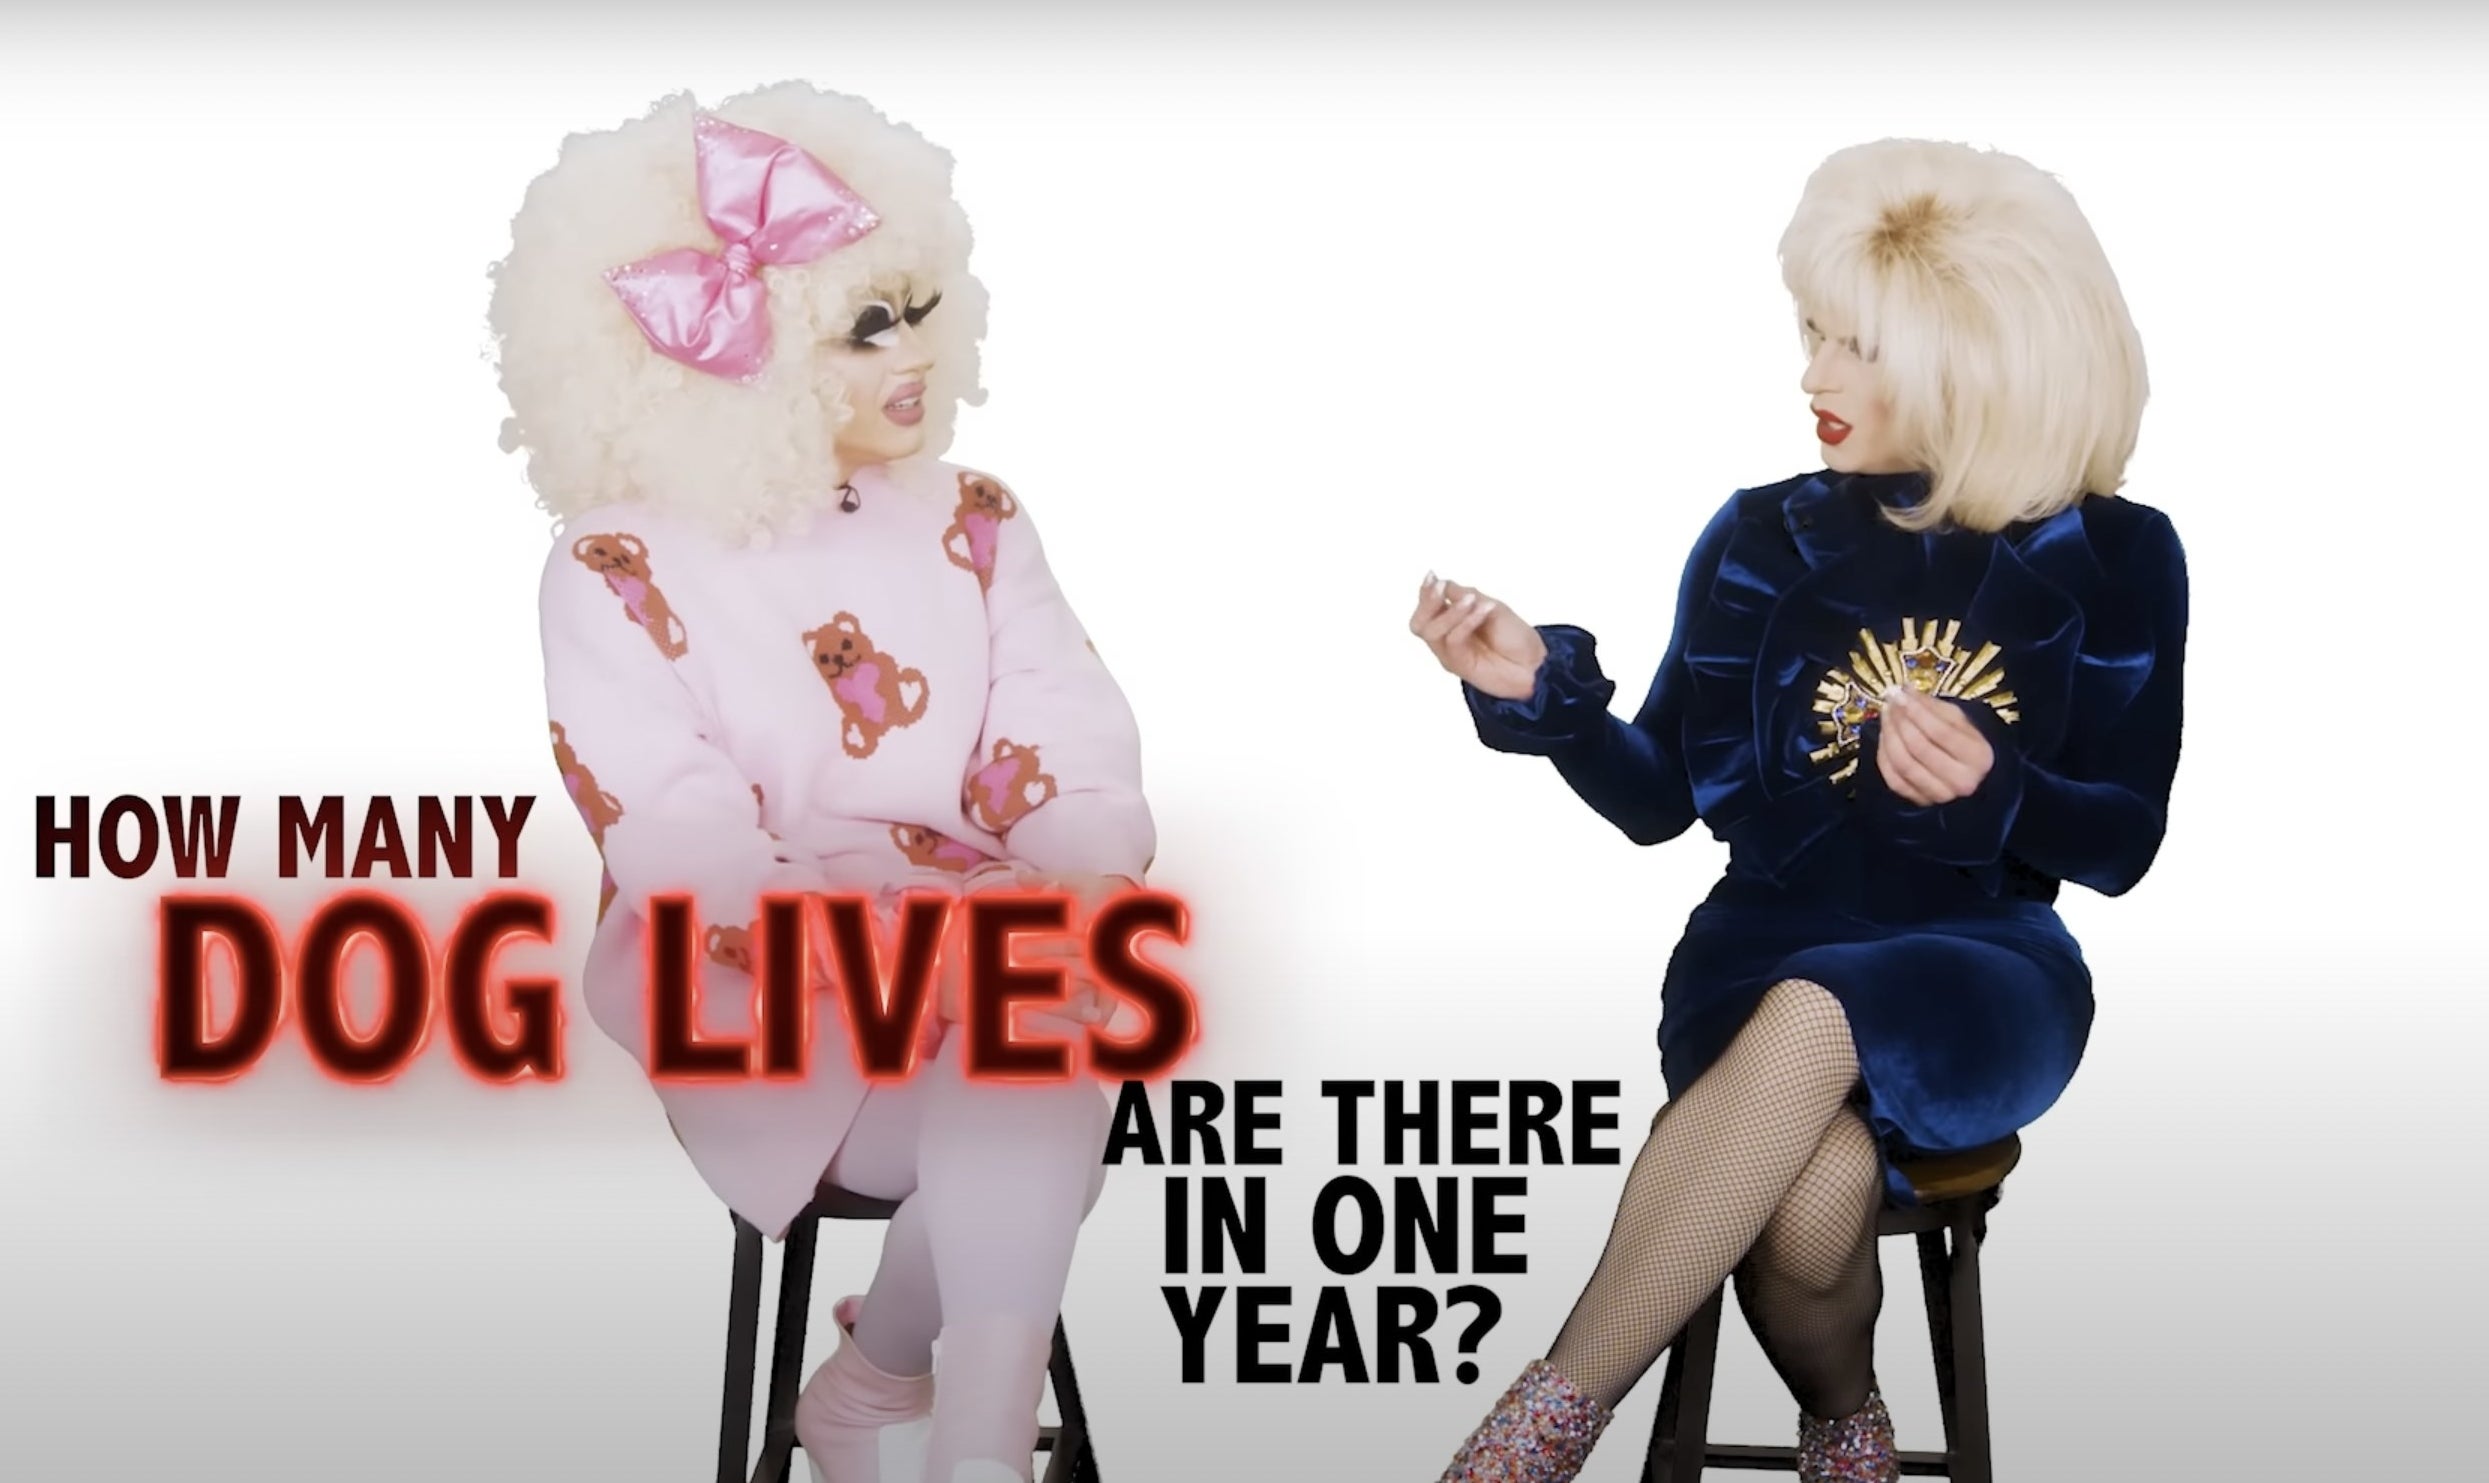 Katya says, How many dog lives are there in one year